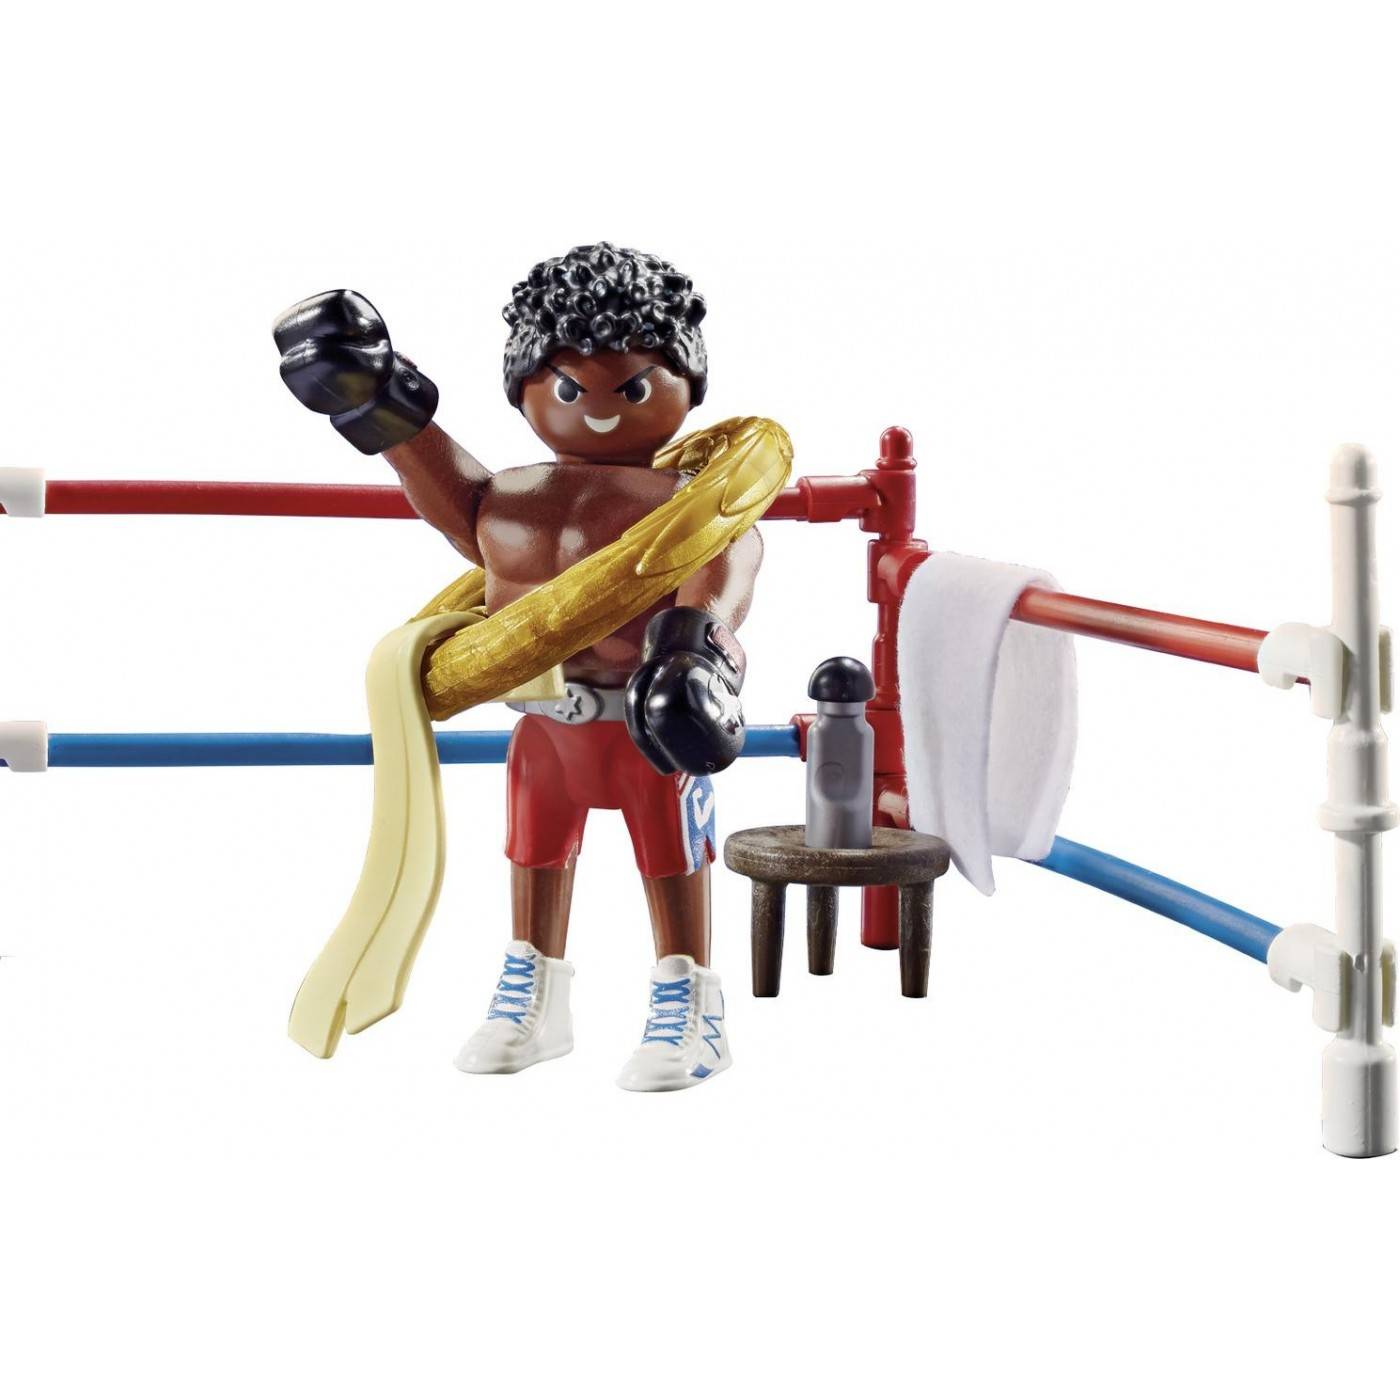 PLAYMOBIL 70879 SPECIAL PLUS BOXING CHAMPION